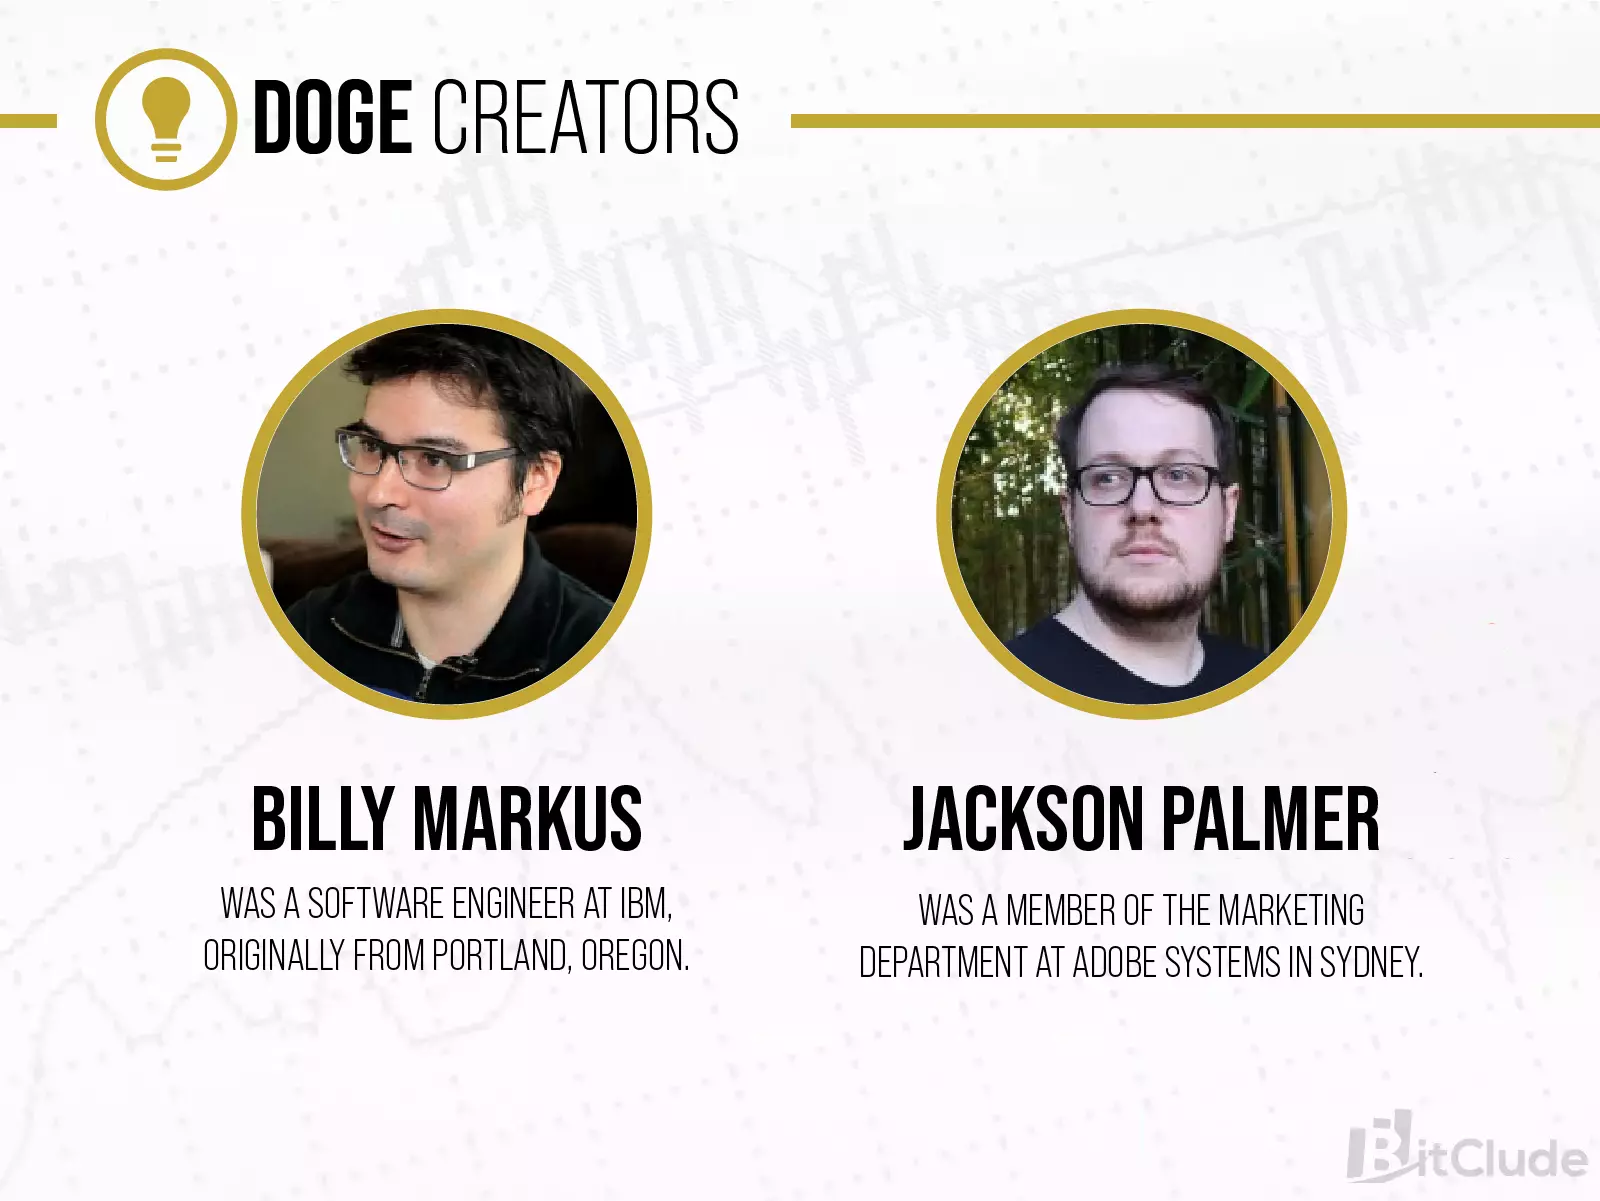 Founders of Dogecoin are Billy Markus and Jackson Palmer.